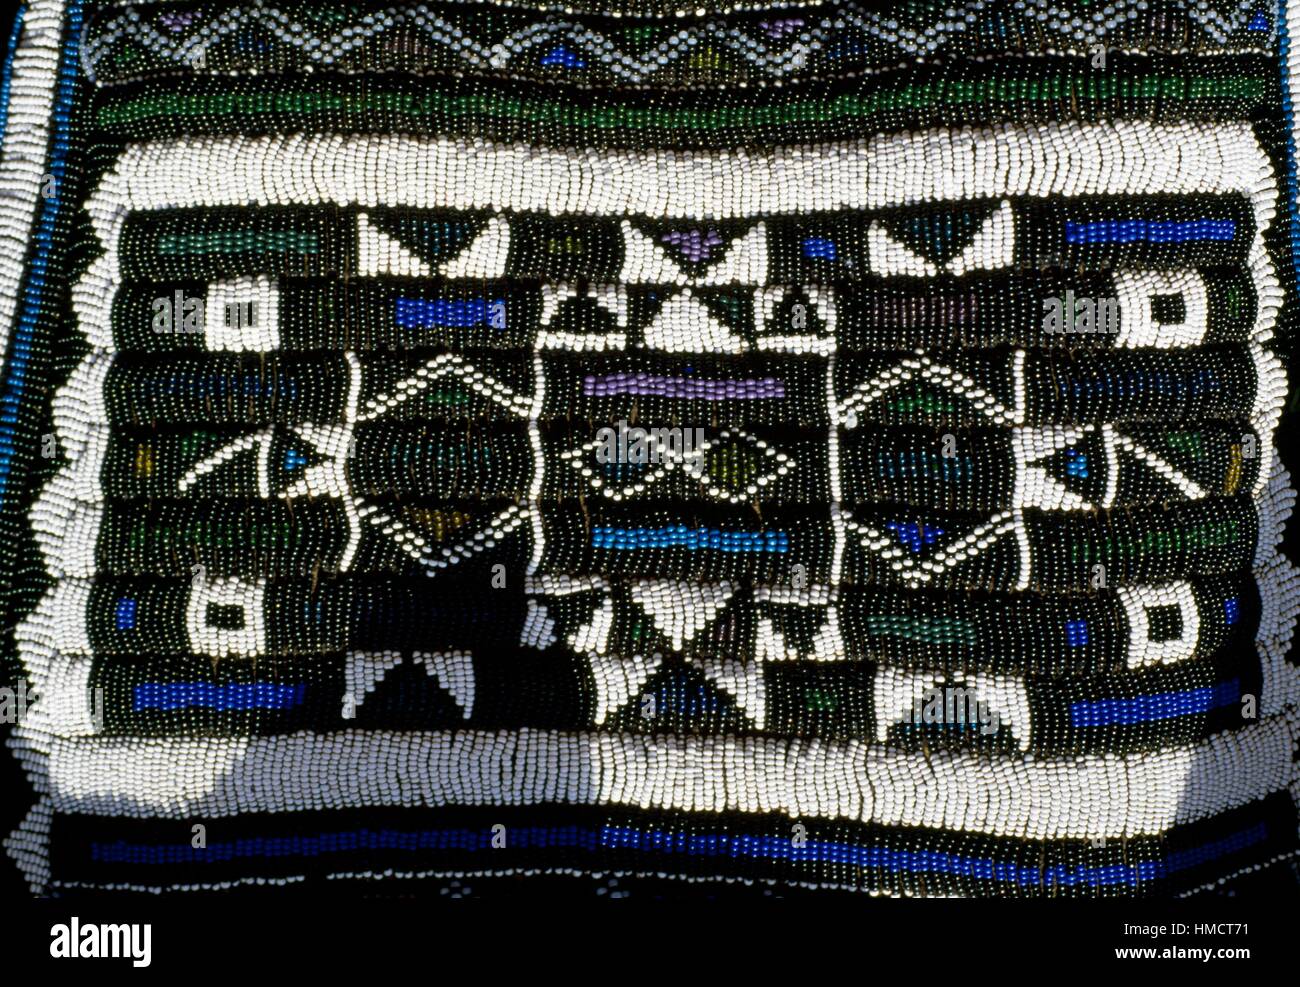 Mapoto, traditional handmade apron, made by the Ndebele people, Botshabelo township, Transvaal, South Africa. Detail. Stock Photo